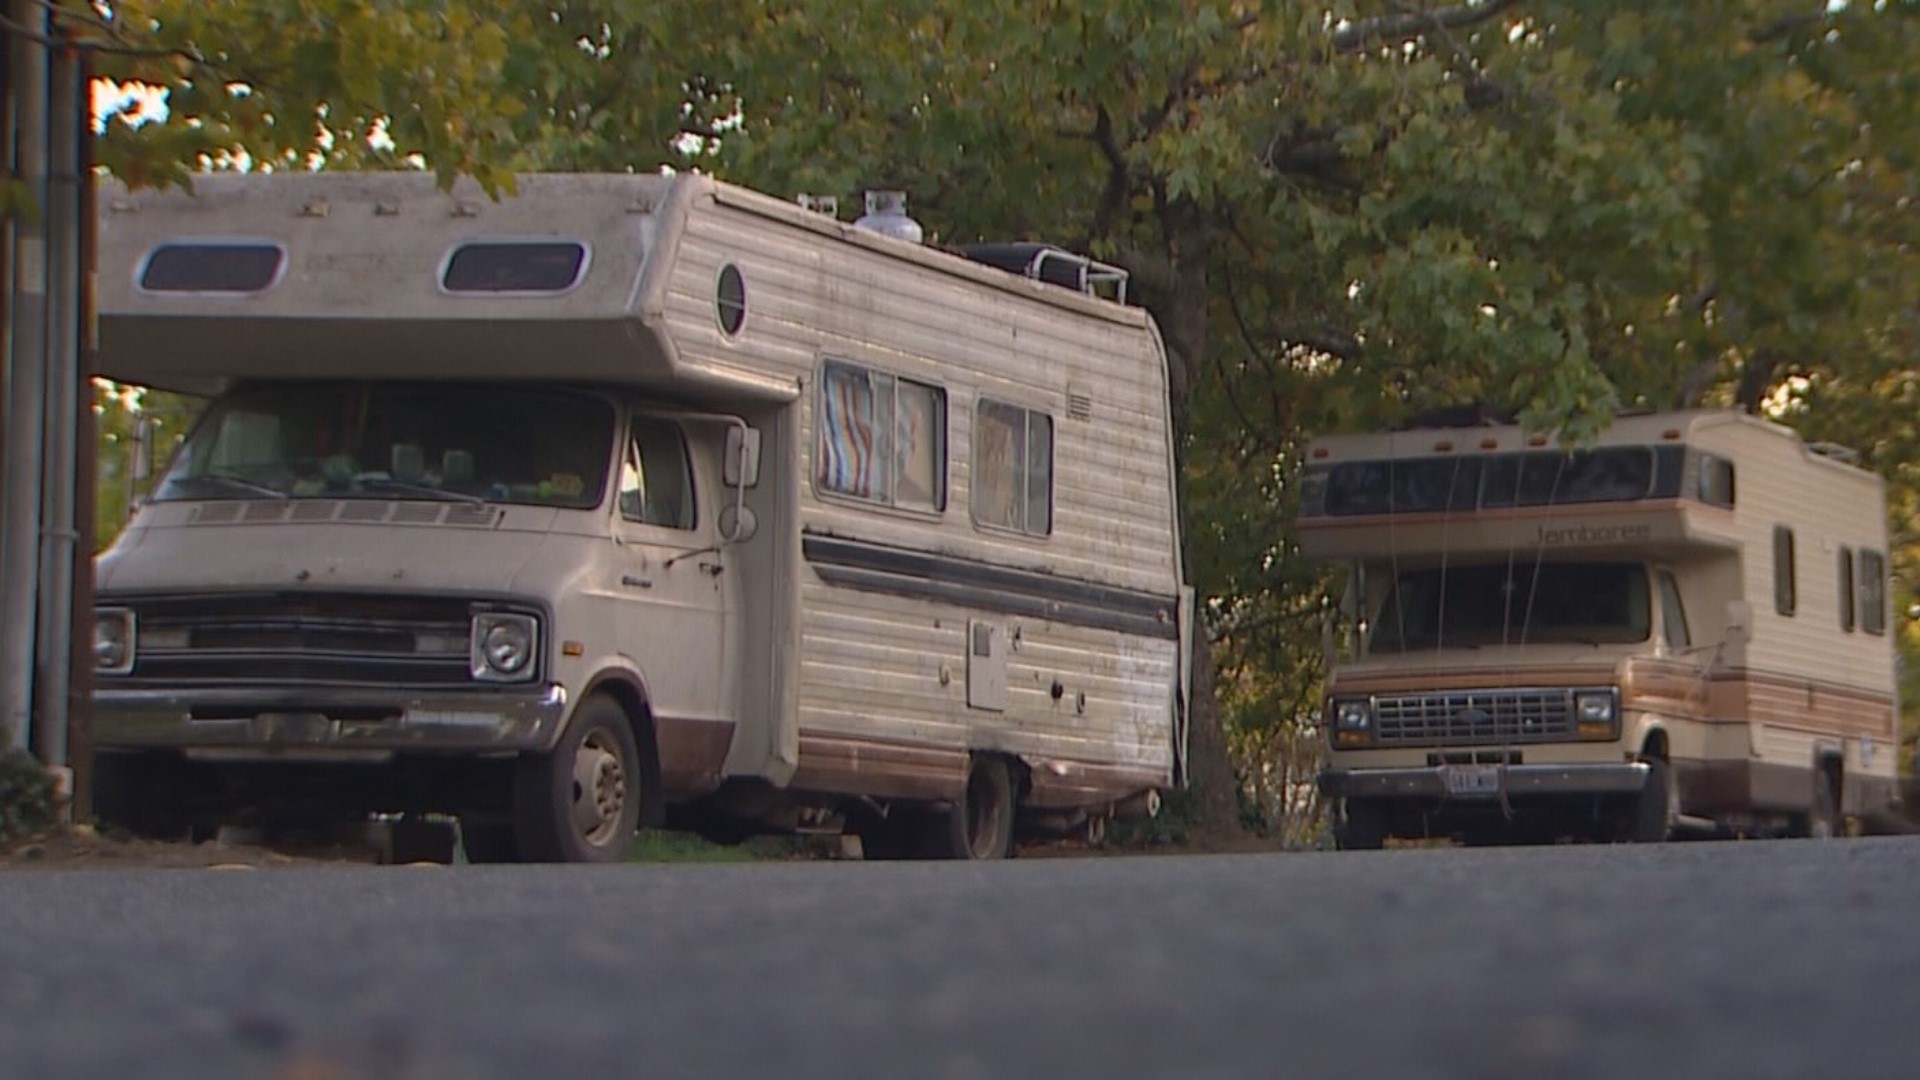 The legislation would require people who own the RV's to also live in them. It also has language aimed at helping tenants find new, safer housing.